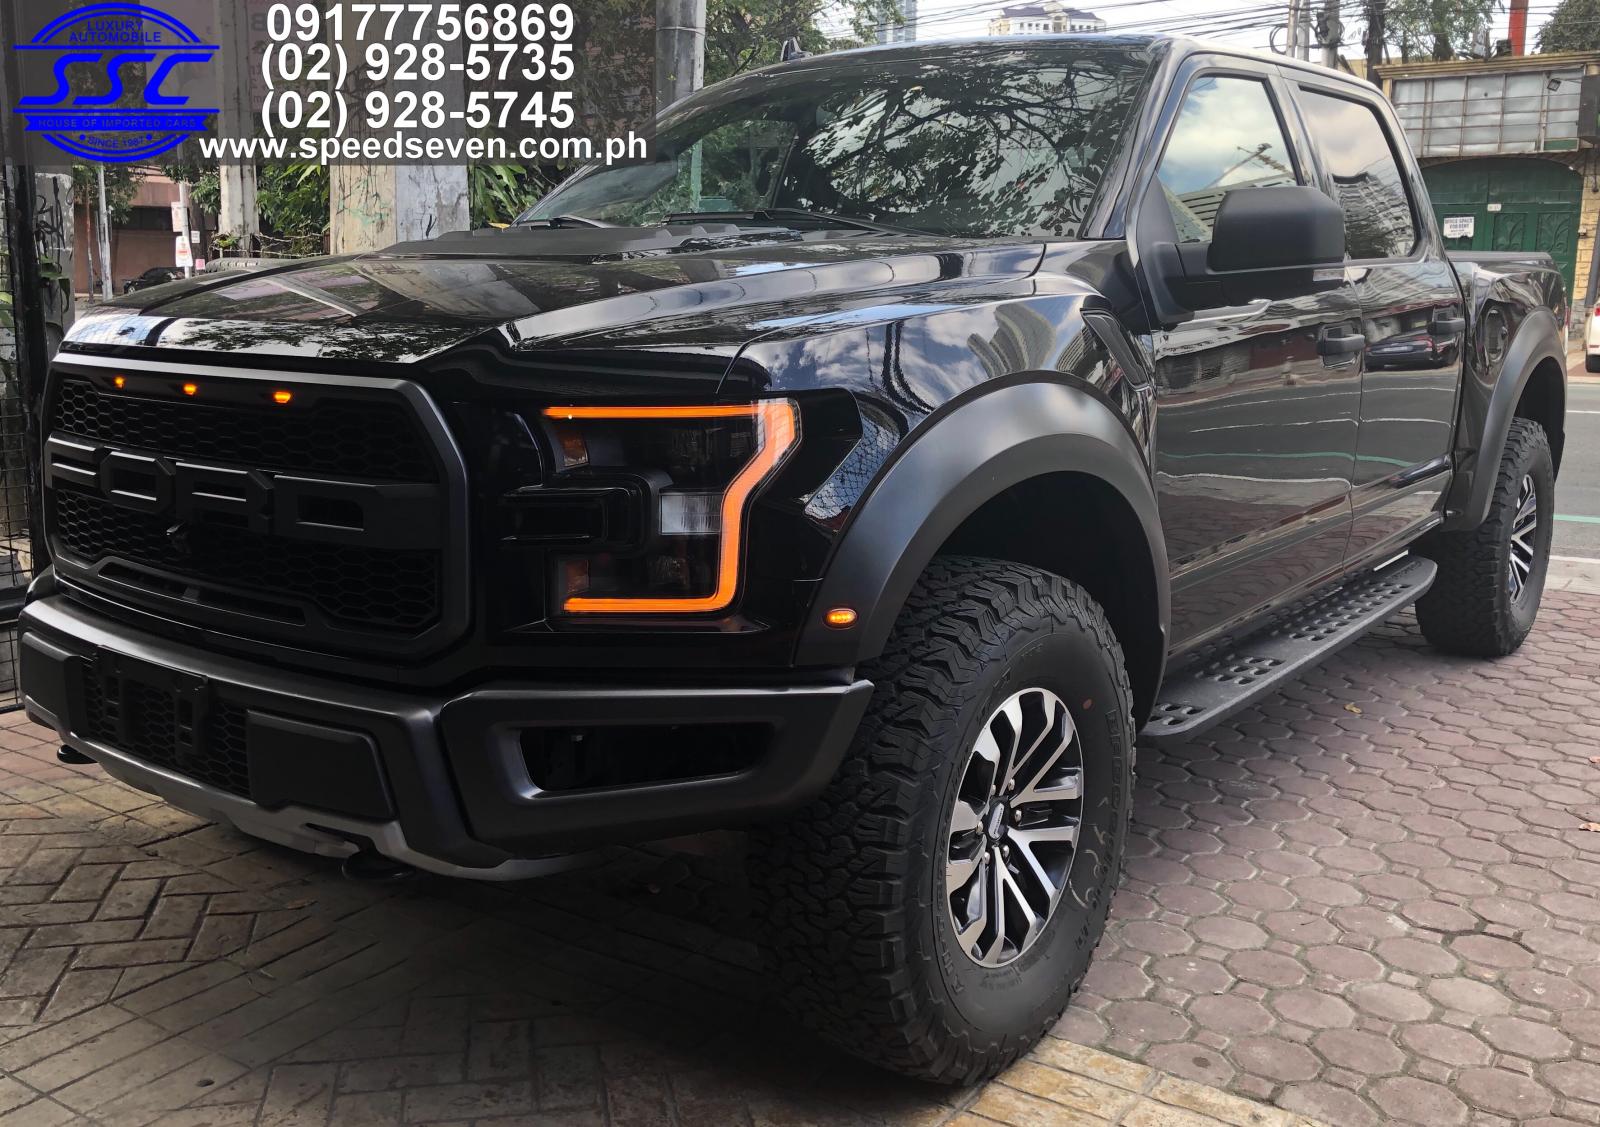 2020 ford raptor for sale near me